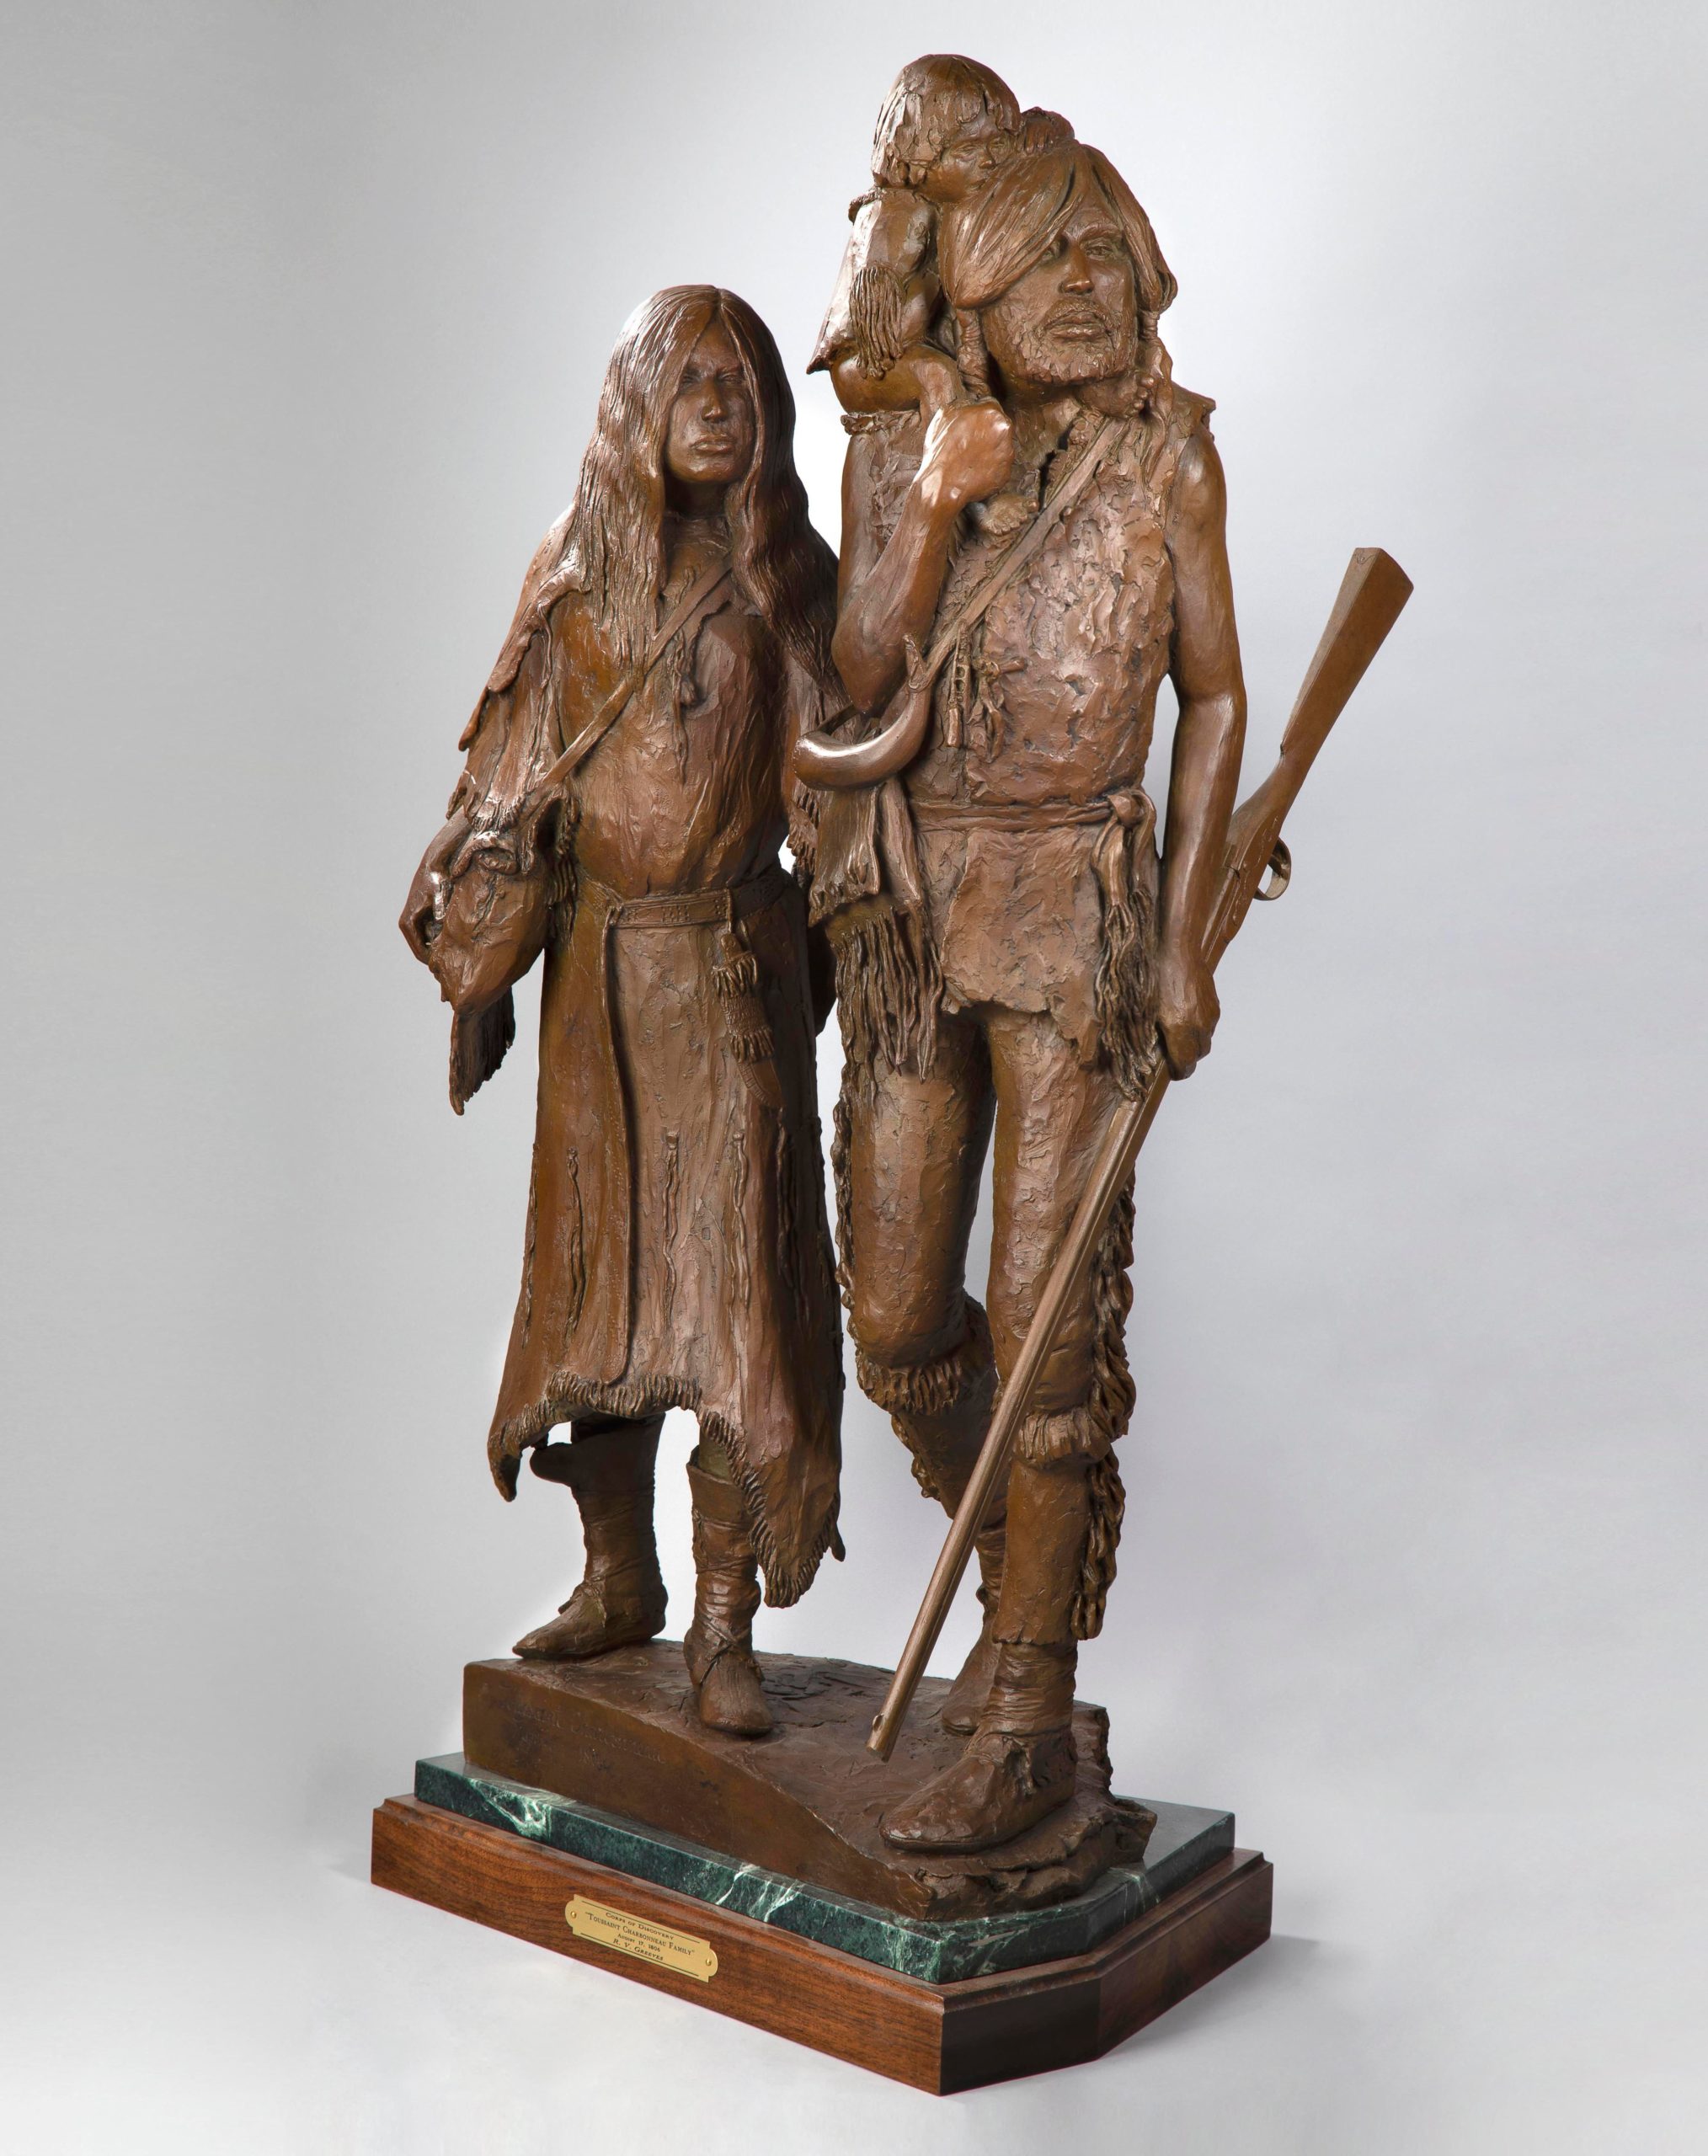 

											Richard V. Greeves </b>

											<em>
												 Lewis & Clark, Corp of Discovery, 1804-1806: The Native Peoples Lewis & Clark Encountered on their Epic Journey</em> 

											<h4>
												August 6 - October 30, 2021											</h4>

		                																																													<i>Toussaint Charbonneau Family,</i>  
																																																					bronze, 
																																								36 x 18 x 17 inches 
																								
		                				